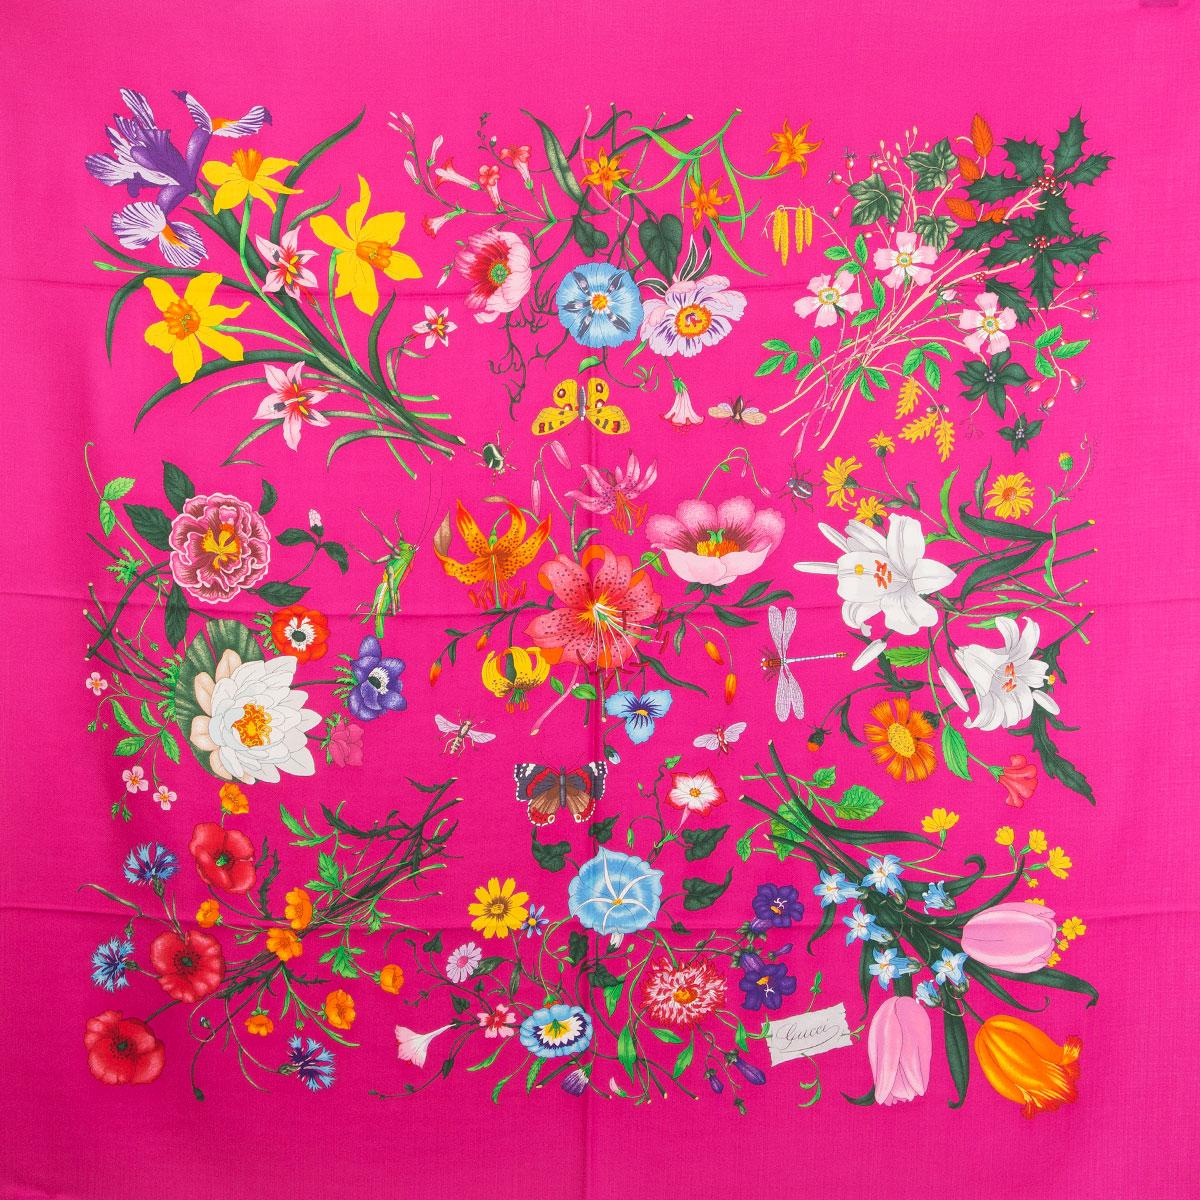 Gucci Flora shawl in All Fluo (fuchsia) cashmere (70%) and silk (30%) with multicolored floral-print. Has been worn and is in virtually new condition.

Width 140cm (54.6in)
Length 140cm (54.6in)
